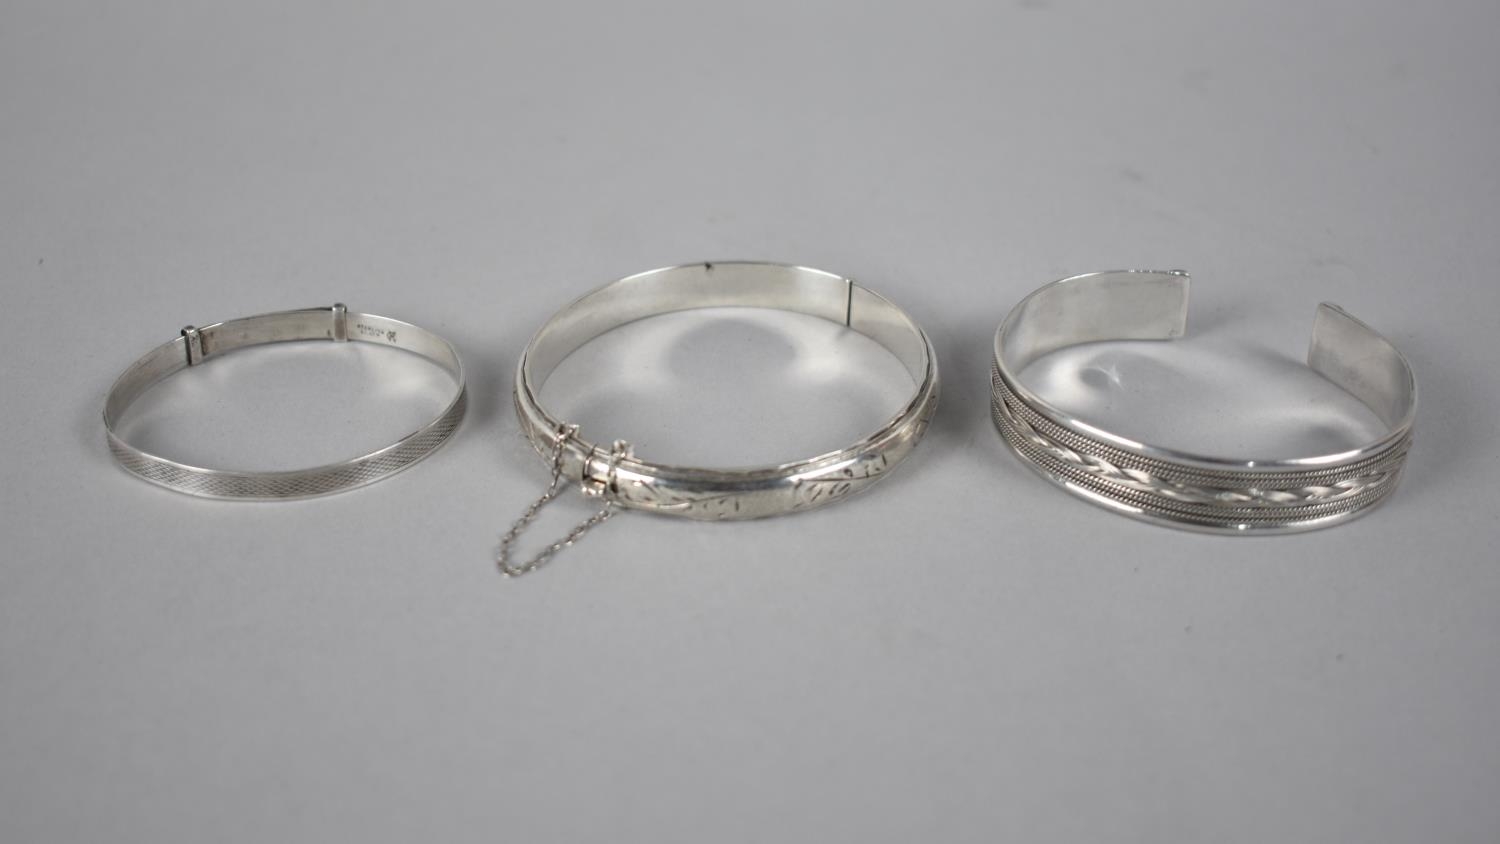 Three Silver Bracelets to include Childs Bangle, Eastern Cuff and Vintaged Hinged Bangle with